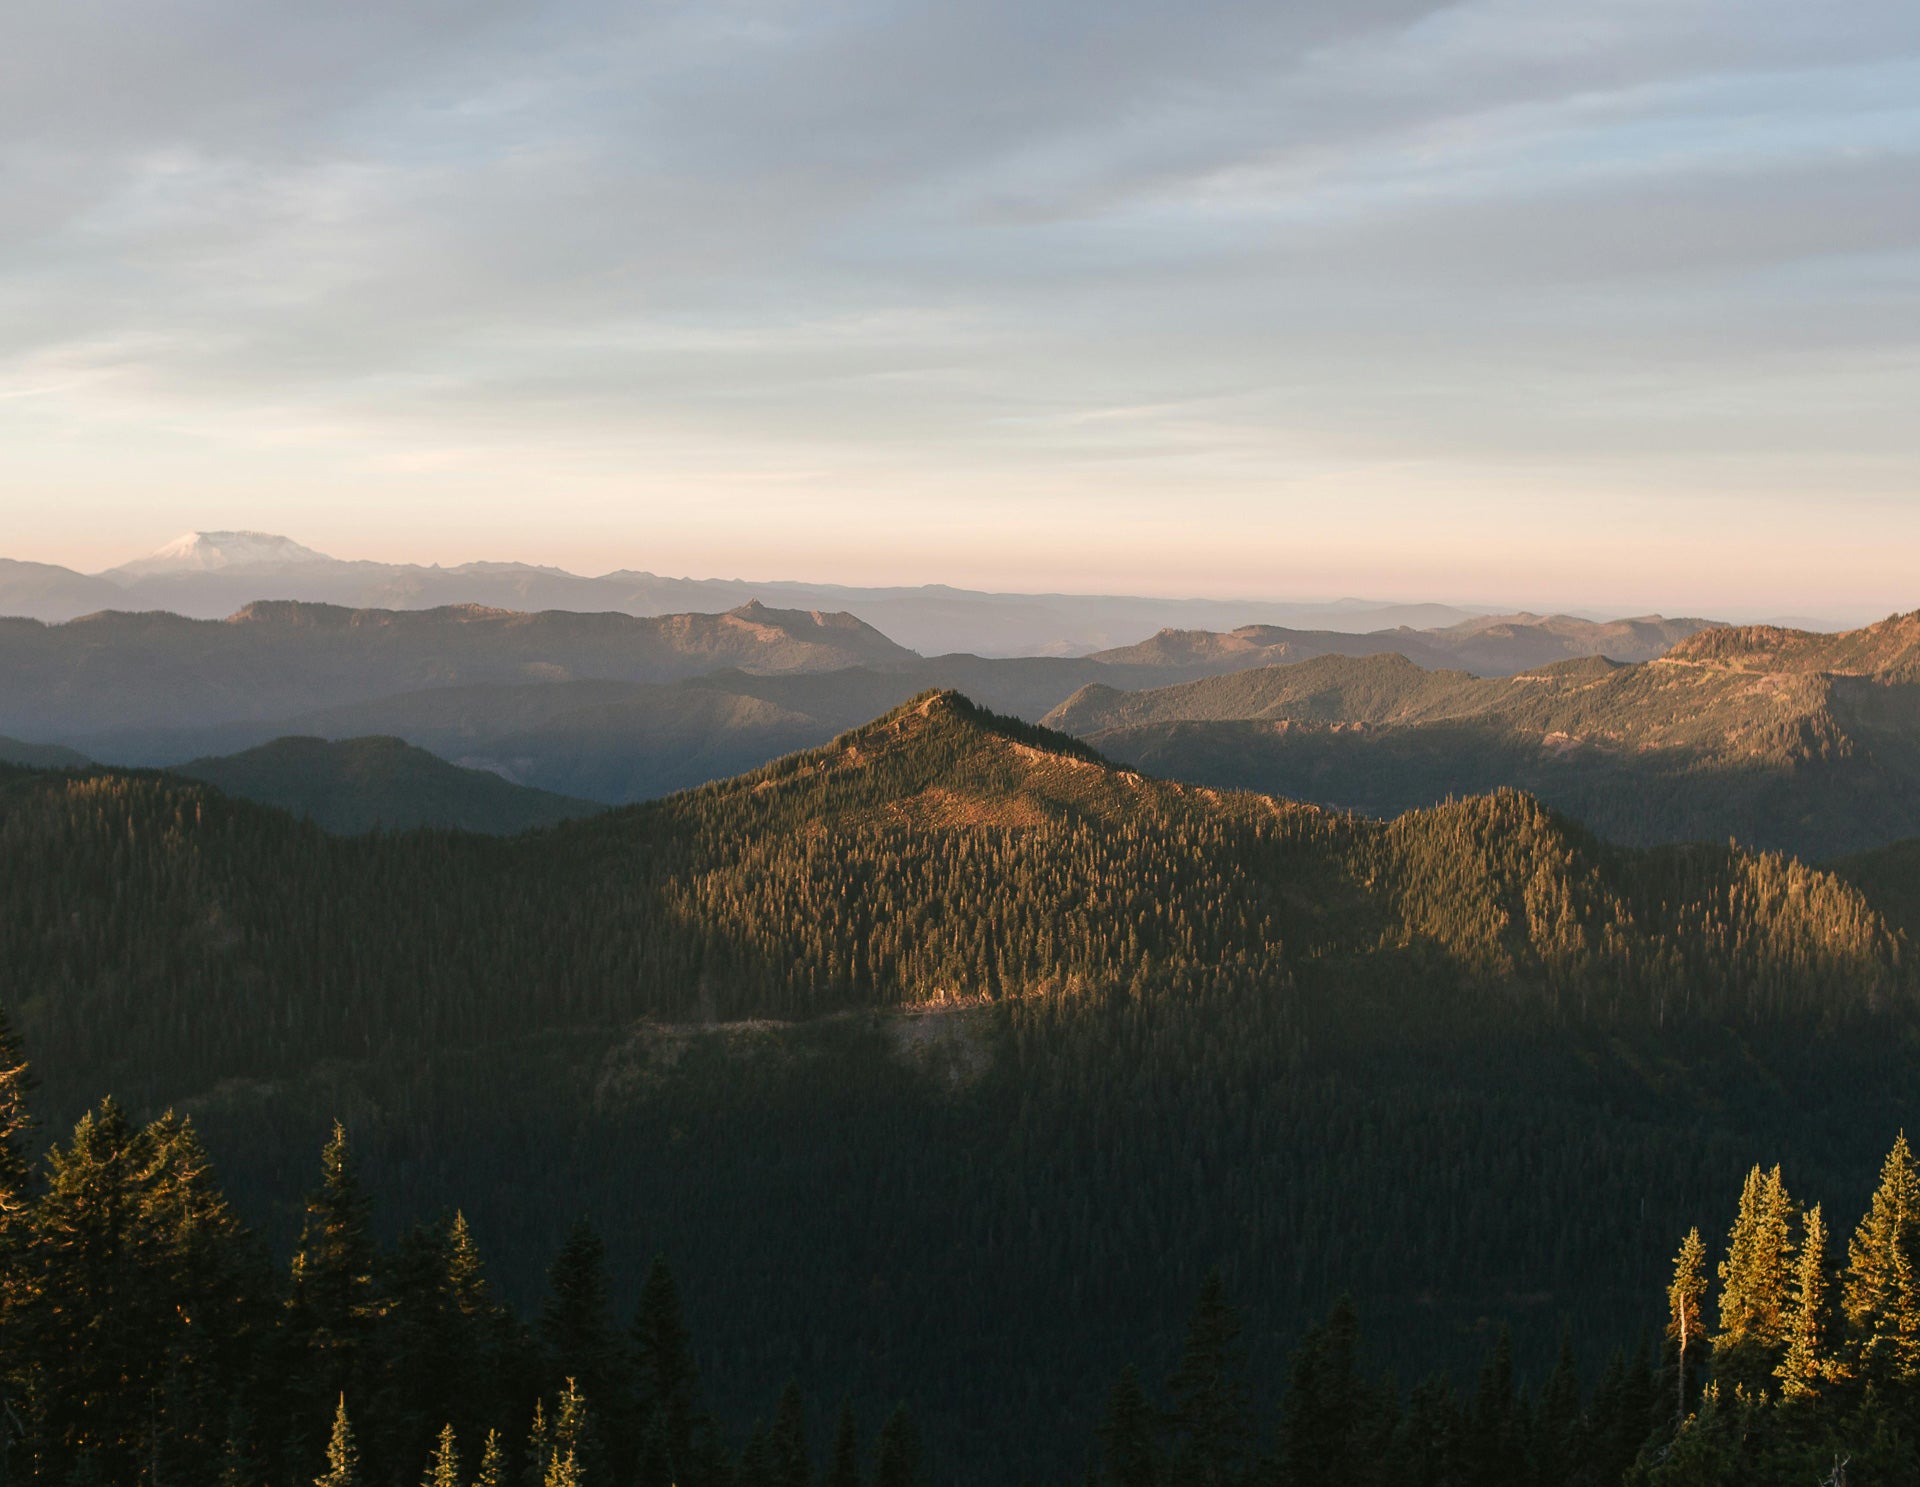 Sunset over a forested mountain range with soft light and distant peaks.